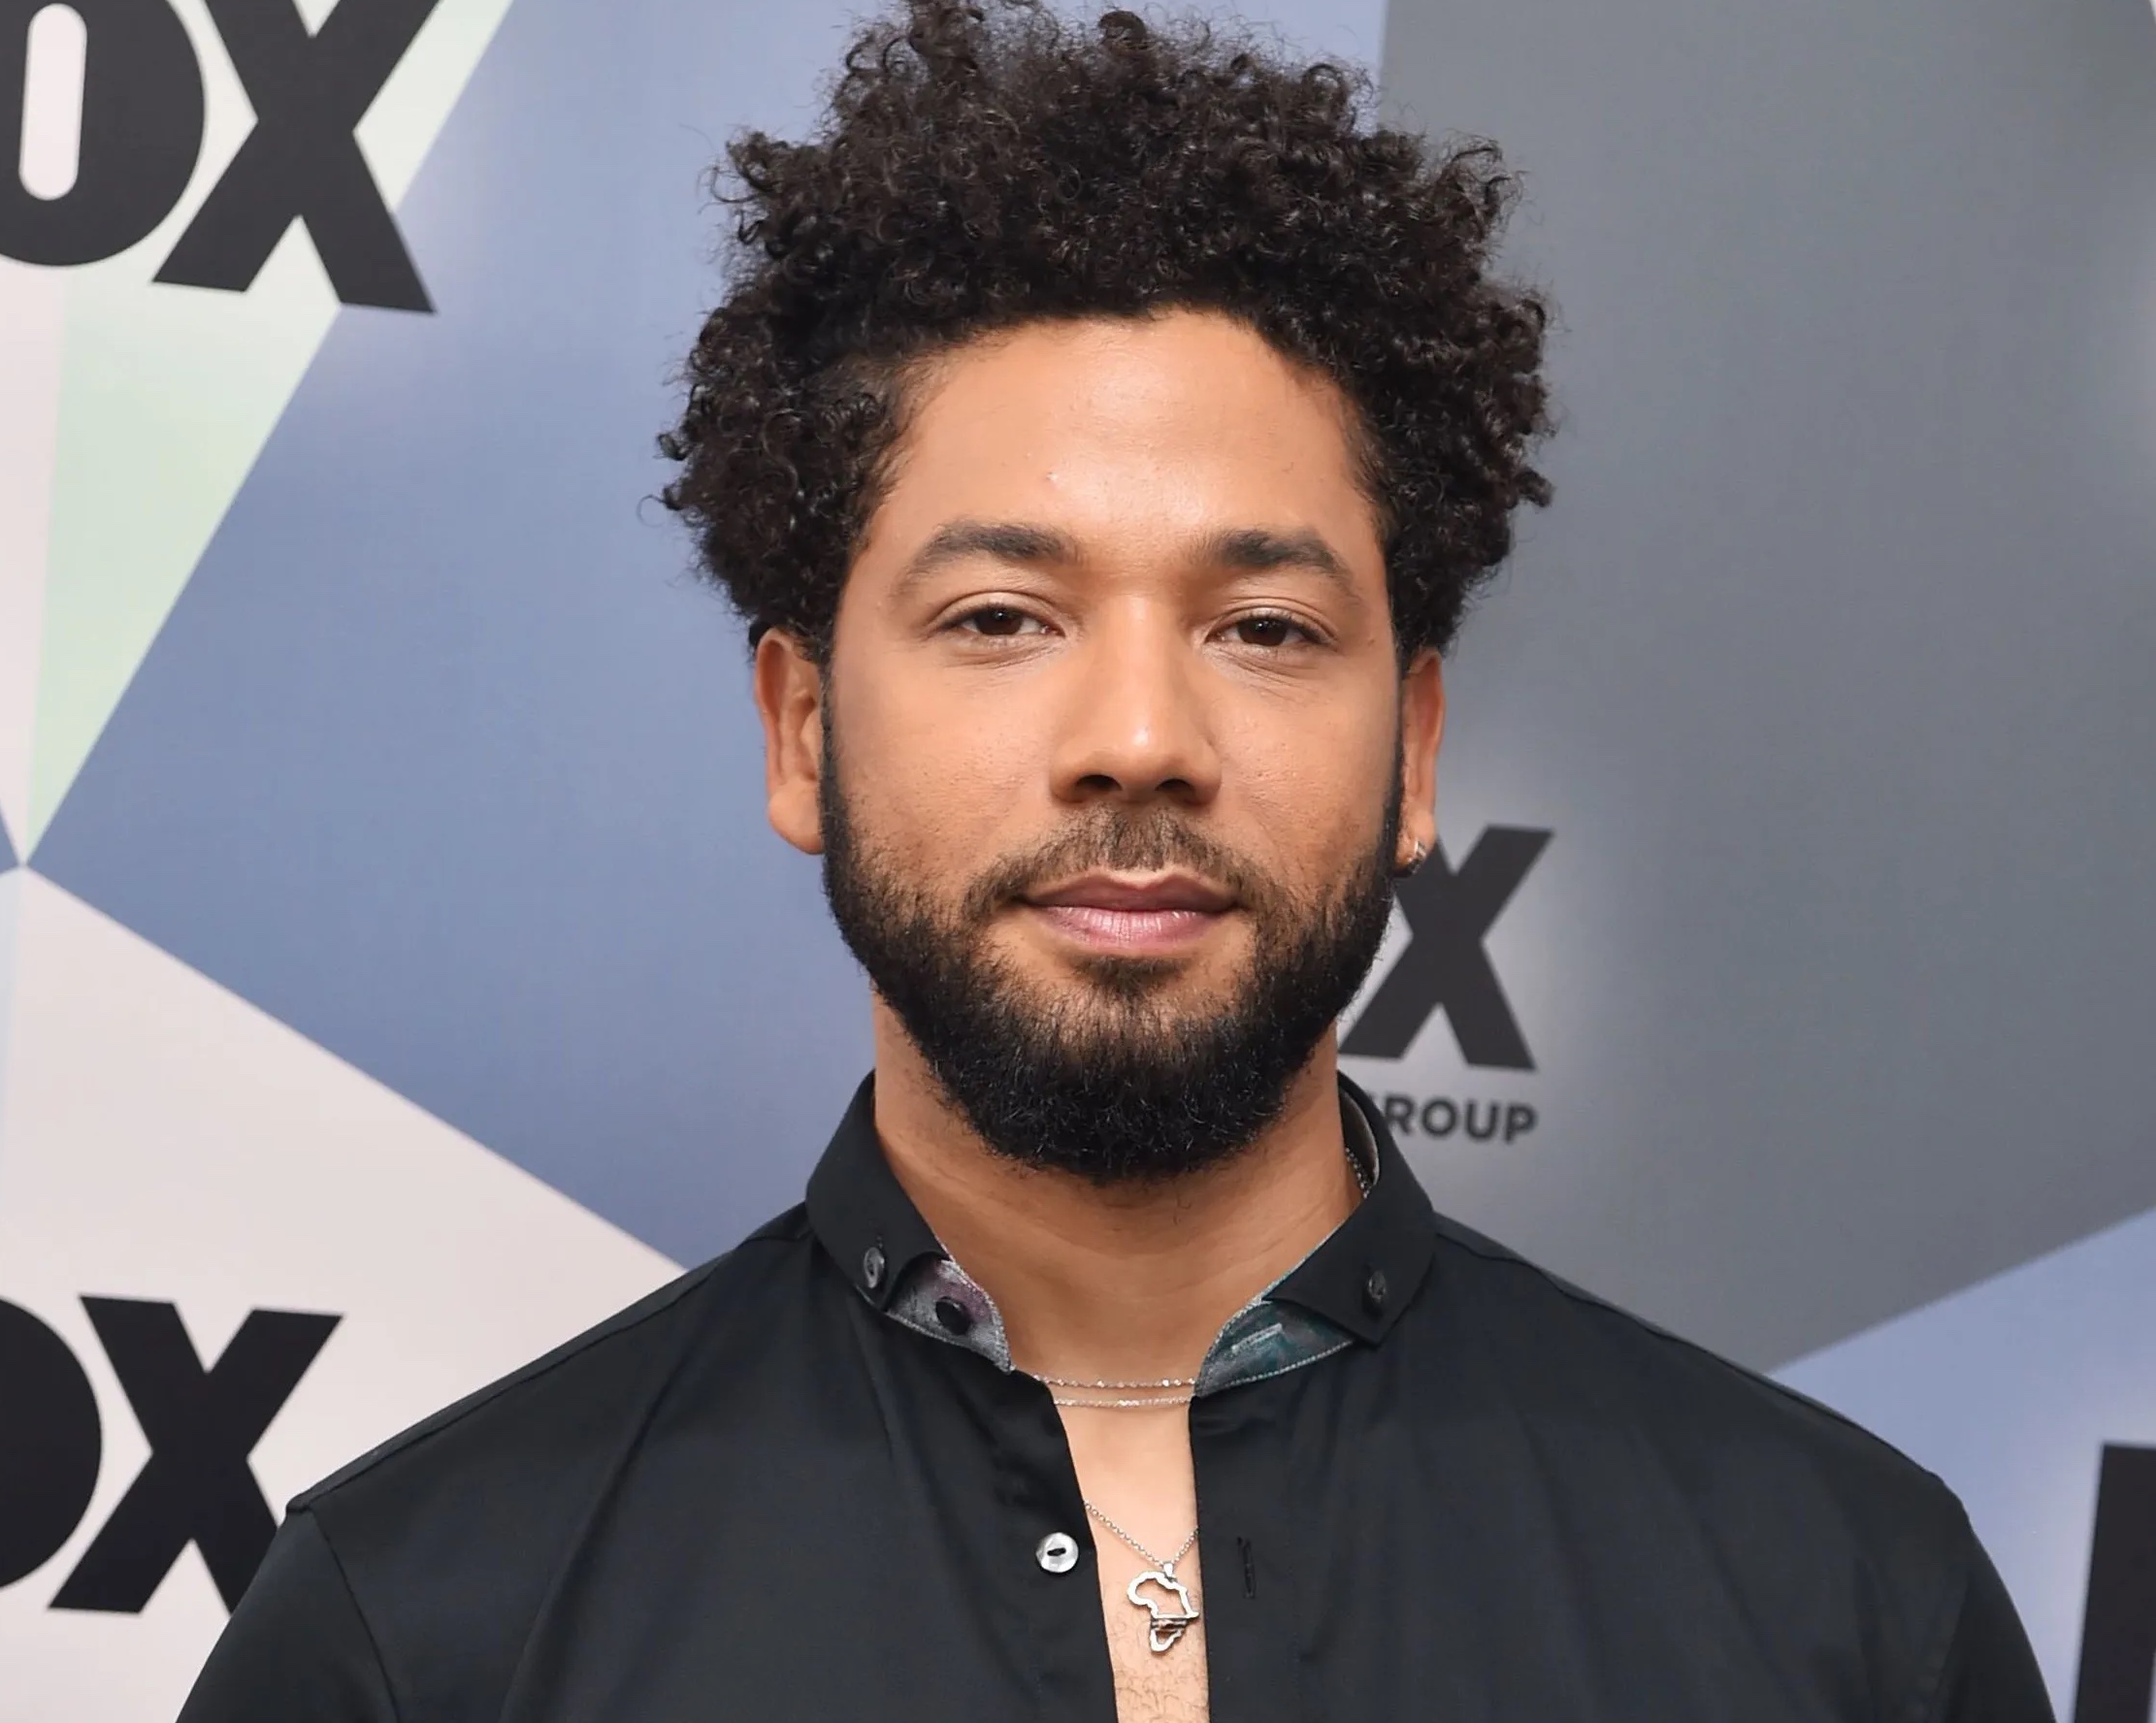 Jussie Smollett. I think his prime motivation was that fame wasn’t enough for him. He wanted to become a symbol, too. And what’s a more positive symbol than standing against racism?  -PenguinGunner